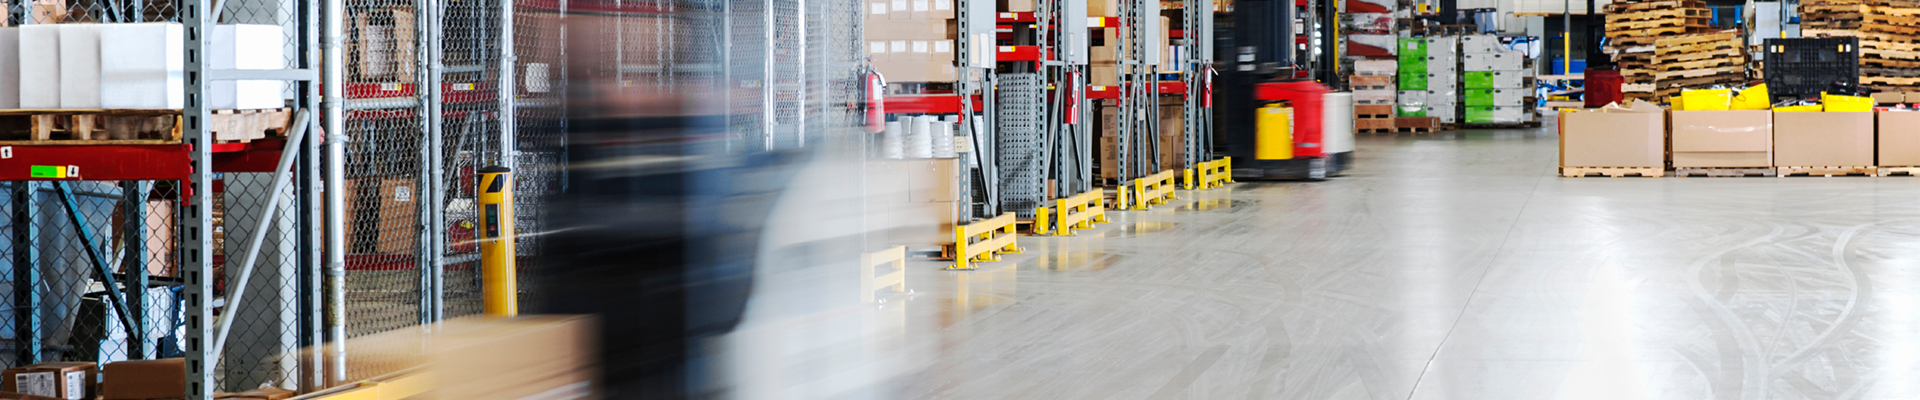 Top 3 Benefits of Using Pallet Cages in a Warehouse